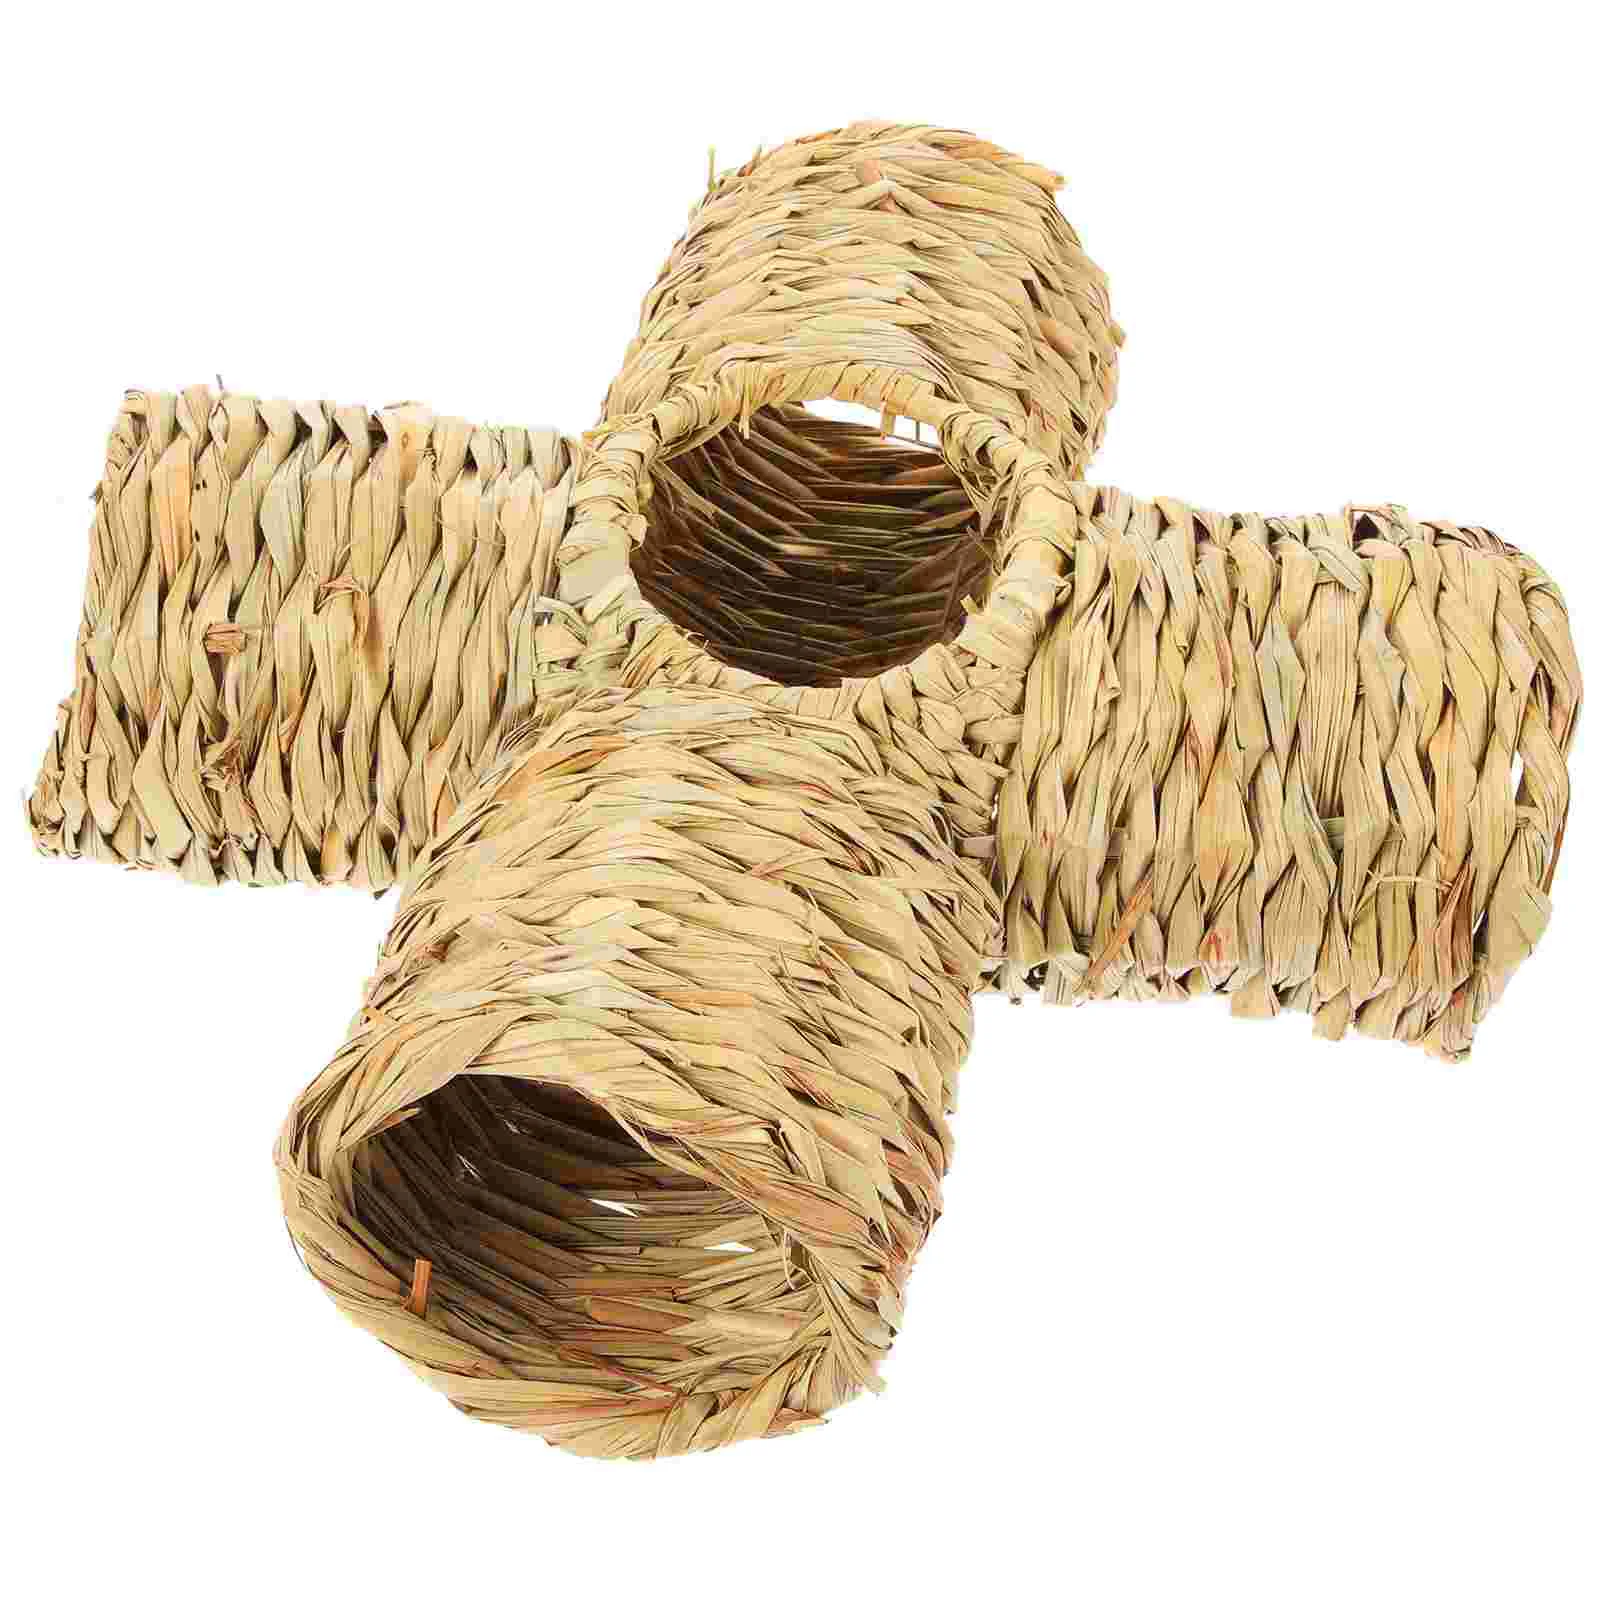 

Straw Woven Hamster Tunnel Toy Guinea Pig Grass House Rabbit Small Pet Natural Hideout Grass Hut Bunny Parrot Rabbit Hamster